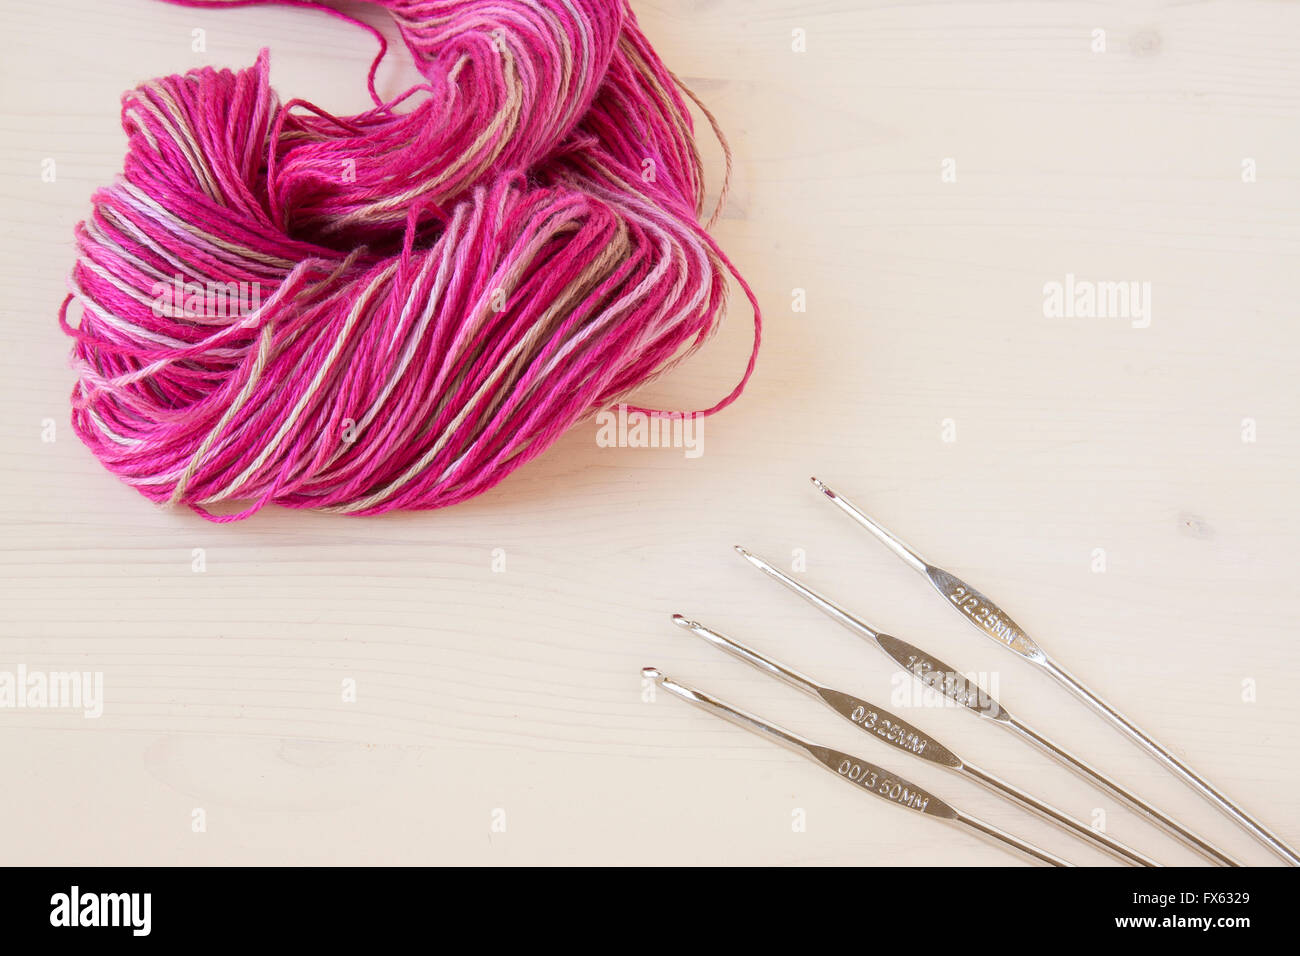 Crochet hooks and a skein of yarn on a wooden background. Stock Photo